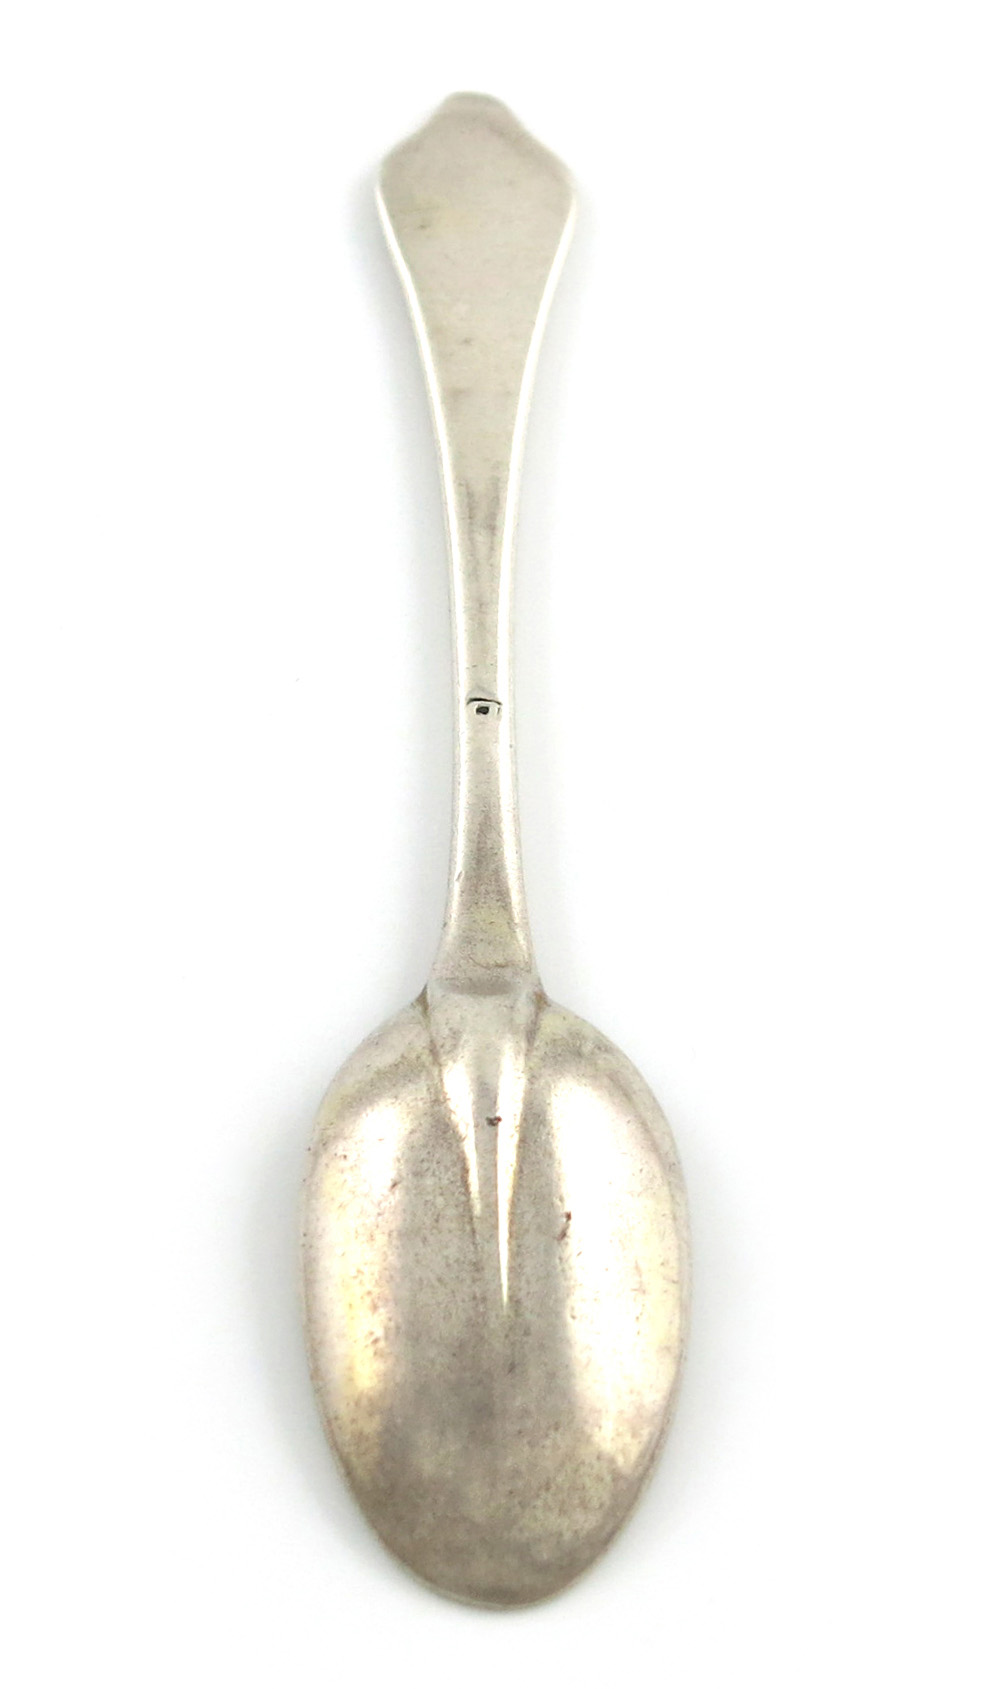 A Queen Anne silver Dog-nose teaspoon, circa 1705, the oval bowl with traces of gilding and with a